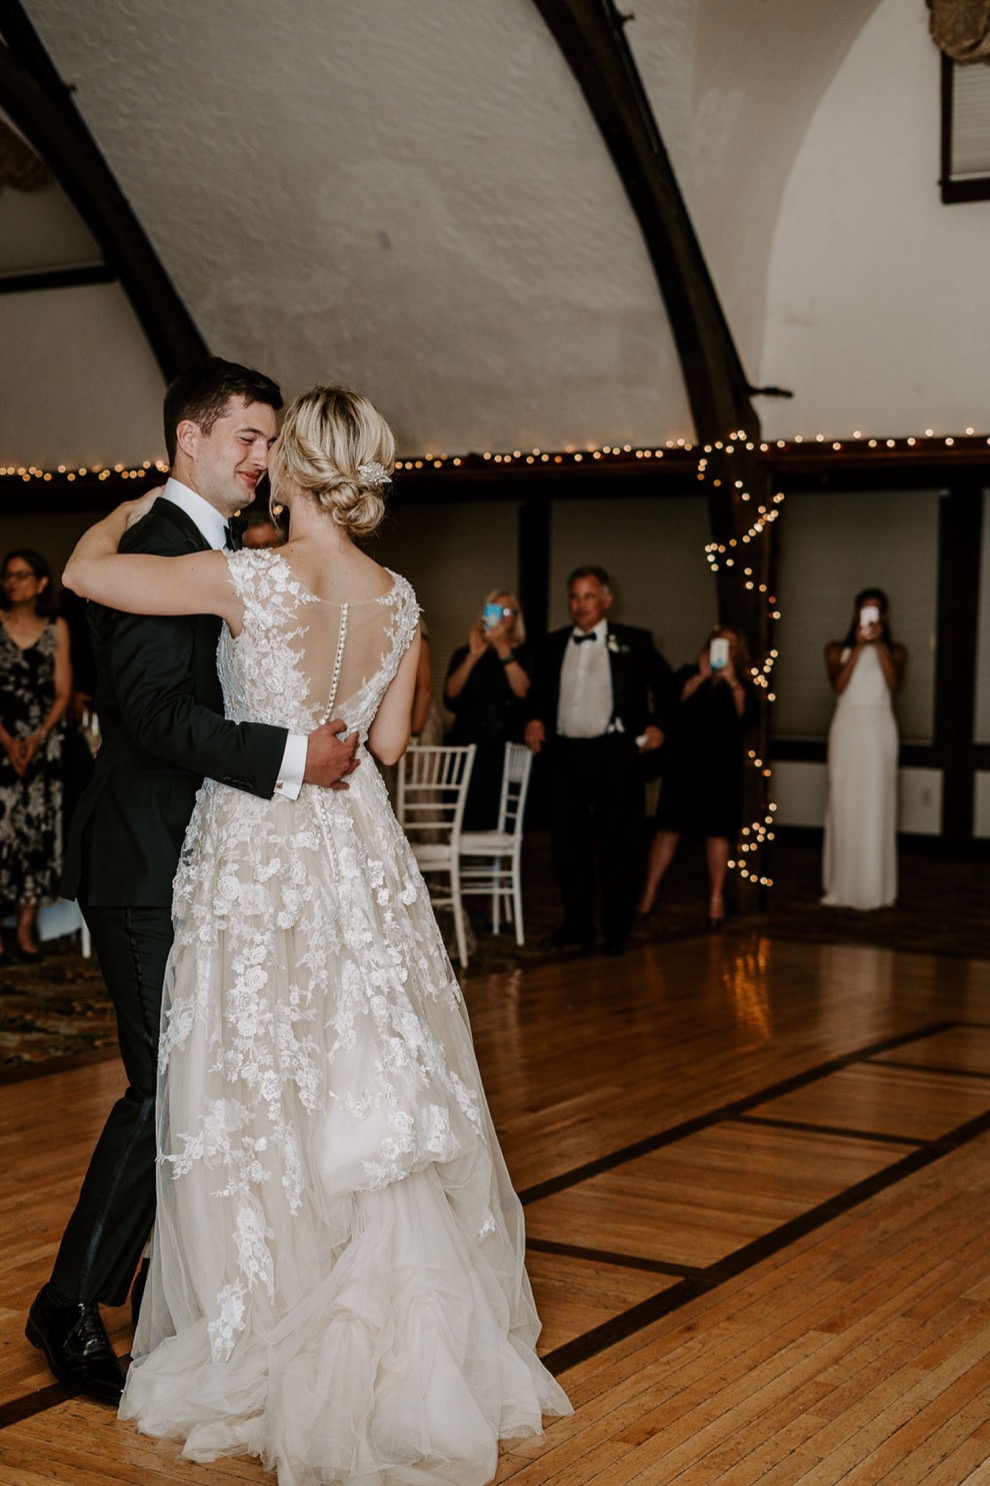 bride and groom first dance at indoor wedding reception